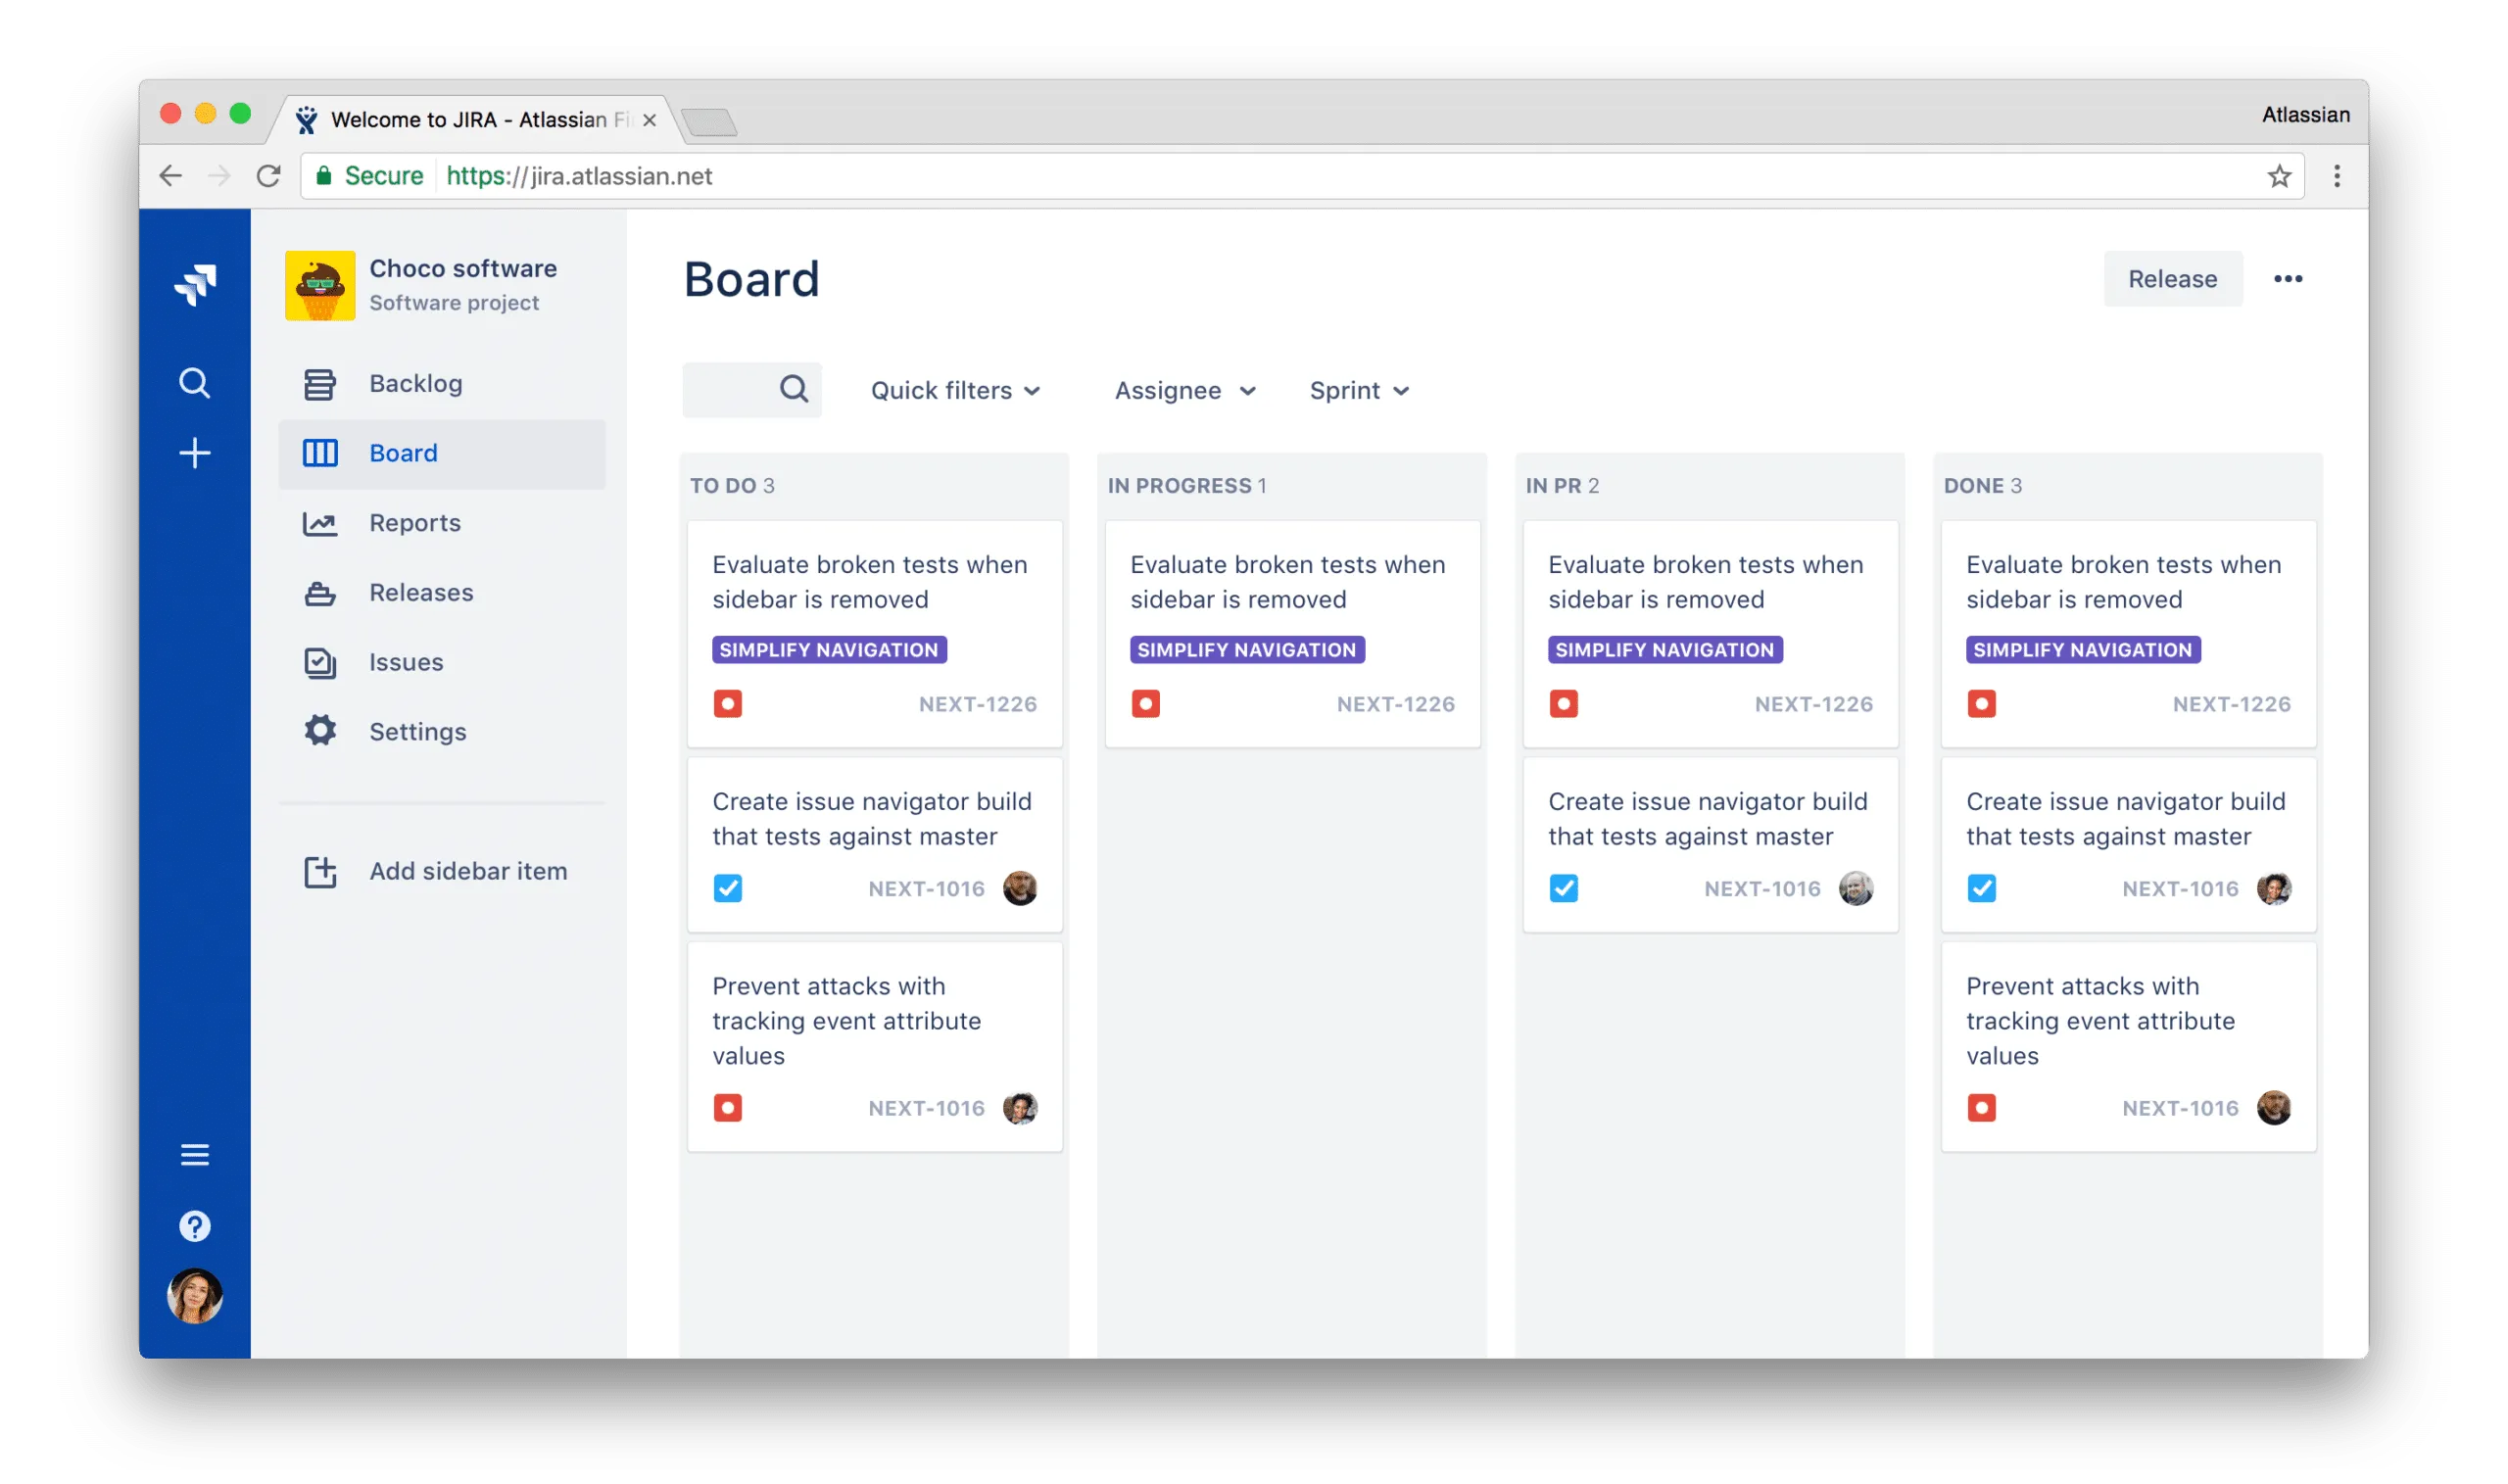 JIRA using ADG 3.0, the latest version of the design system